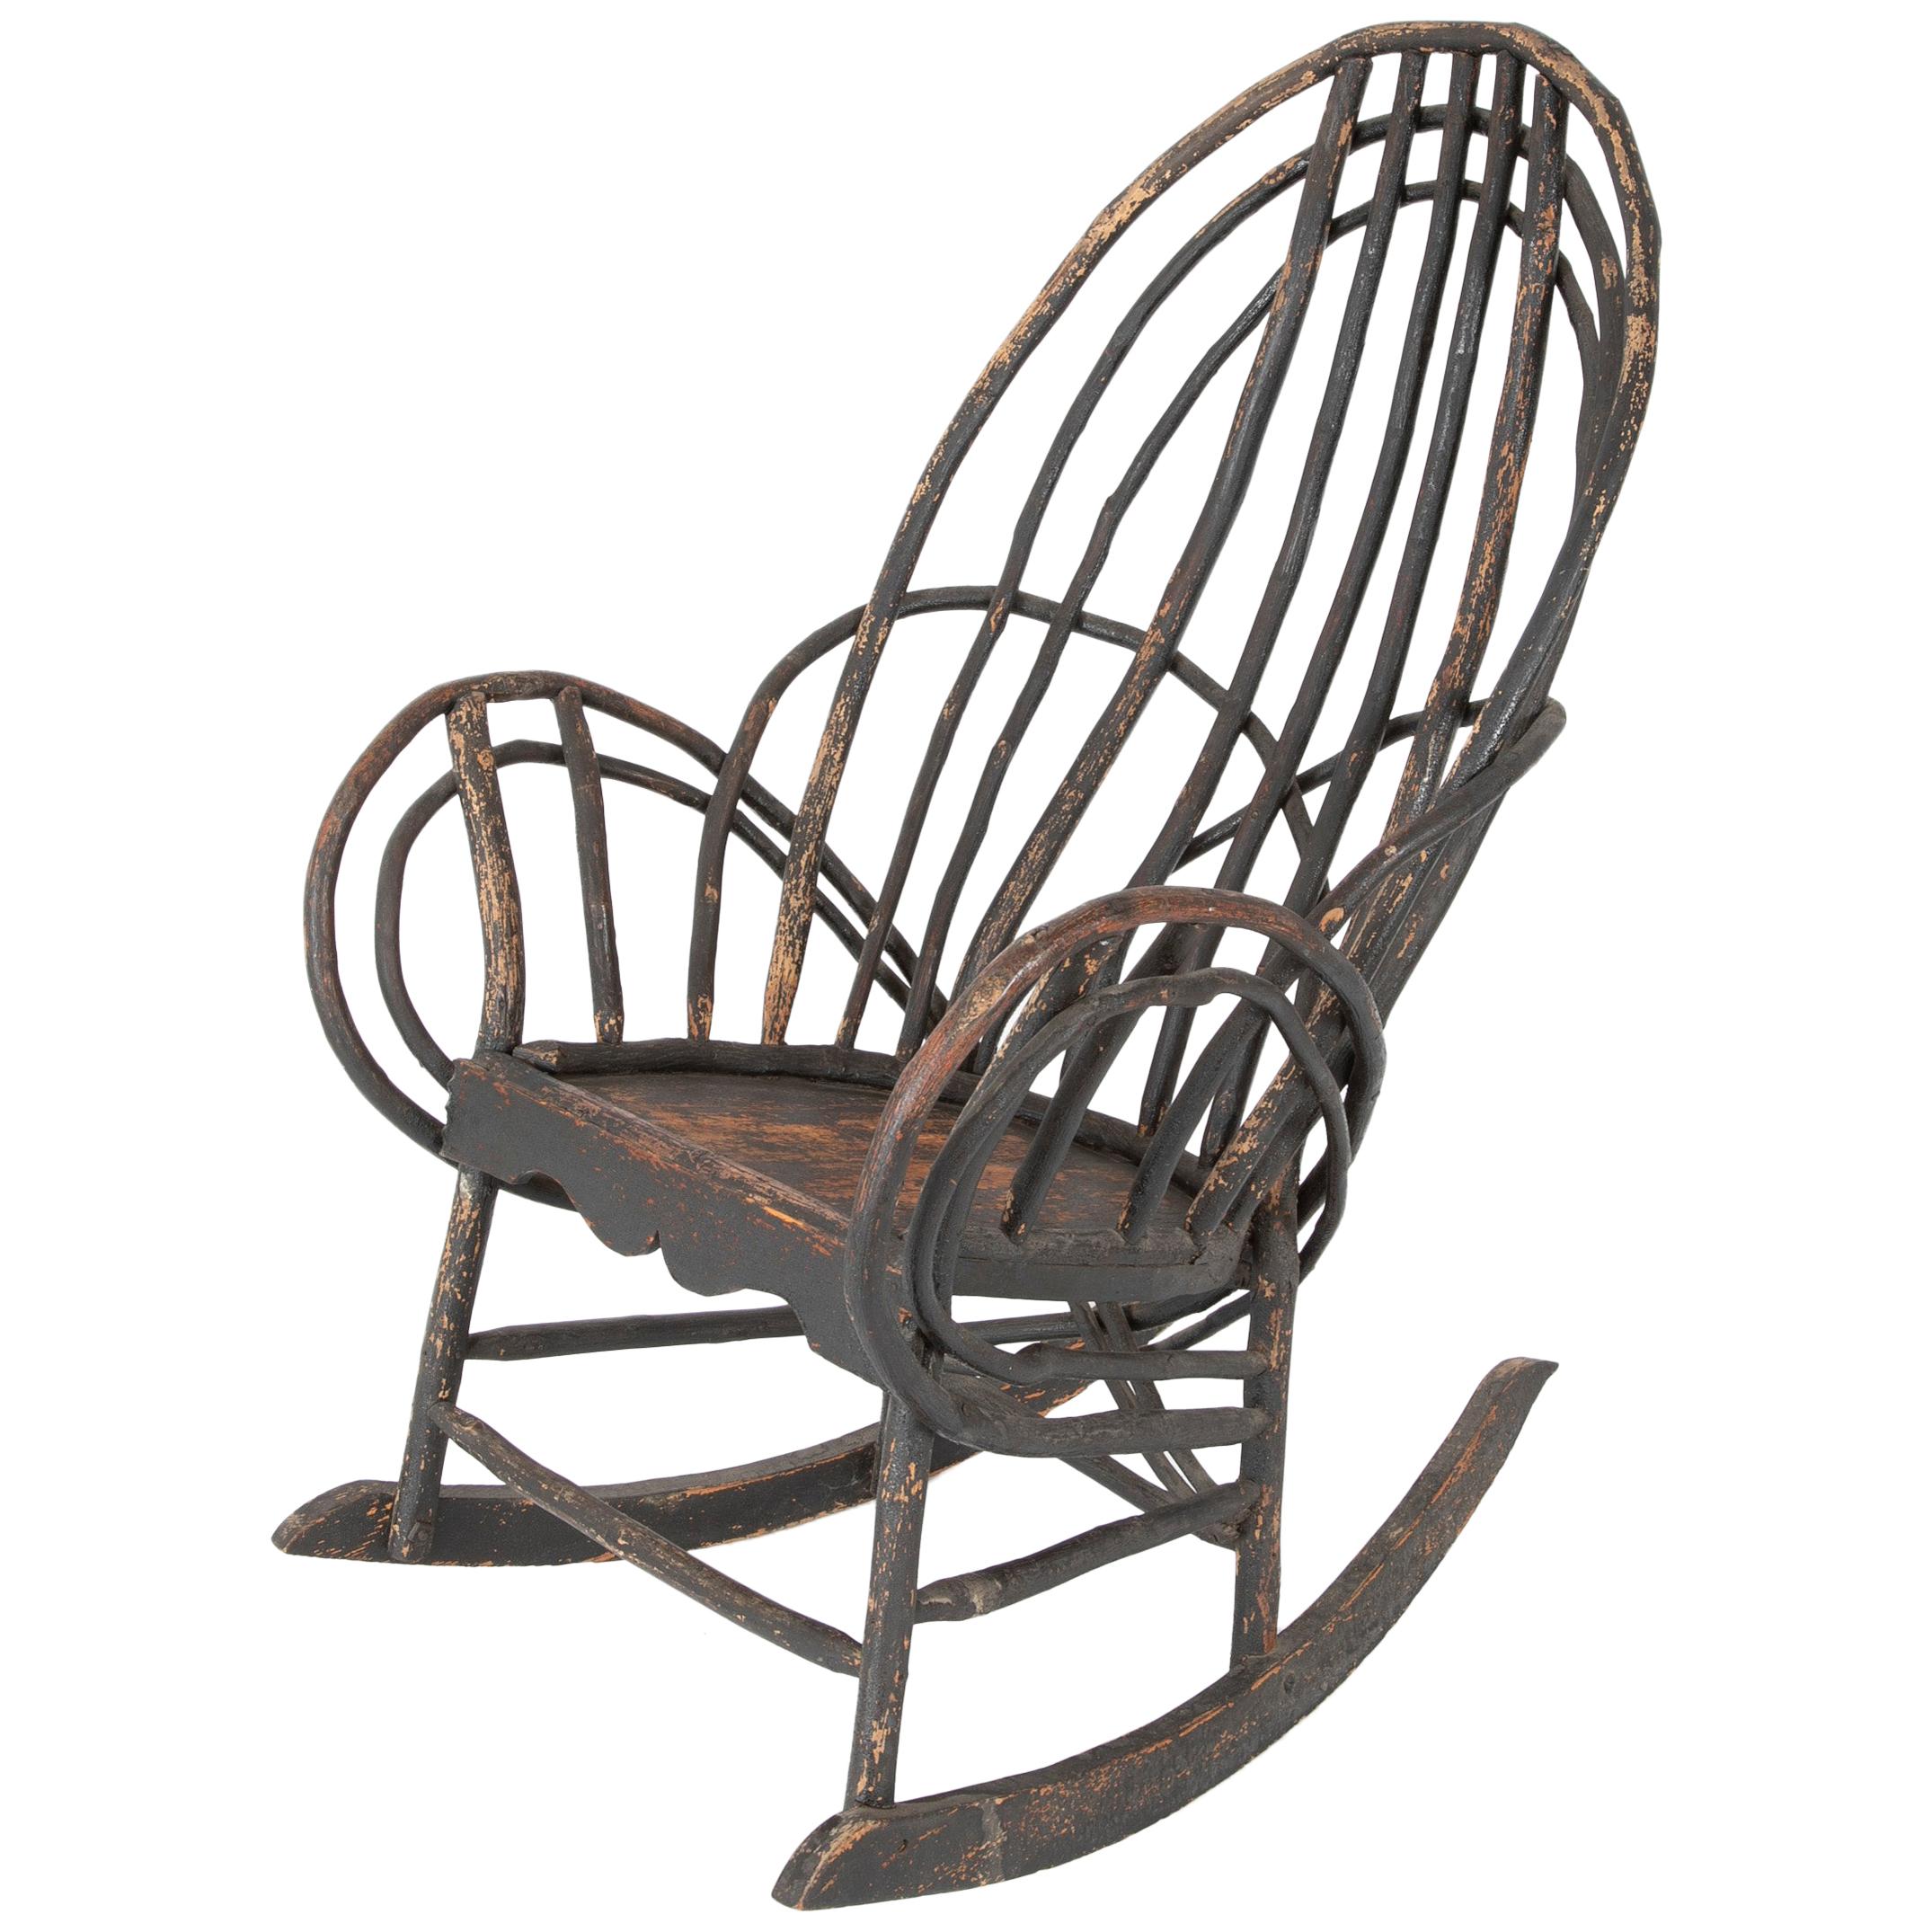 Bentwood Rustic Armchair-Rocker with Plank Seat & Traces of Early Black Paint